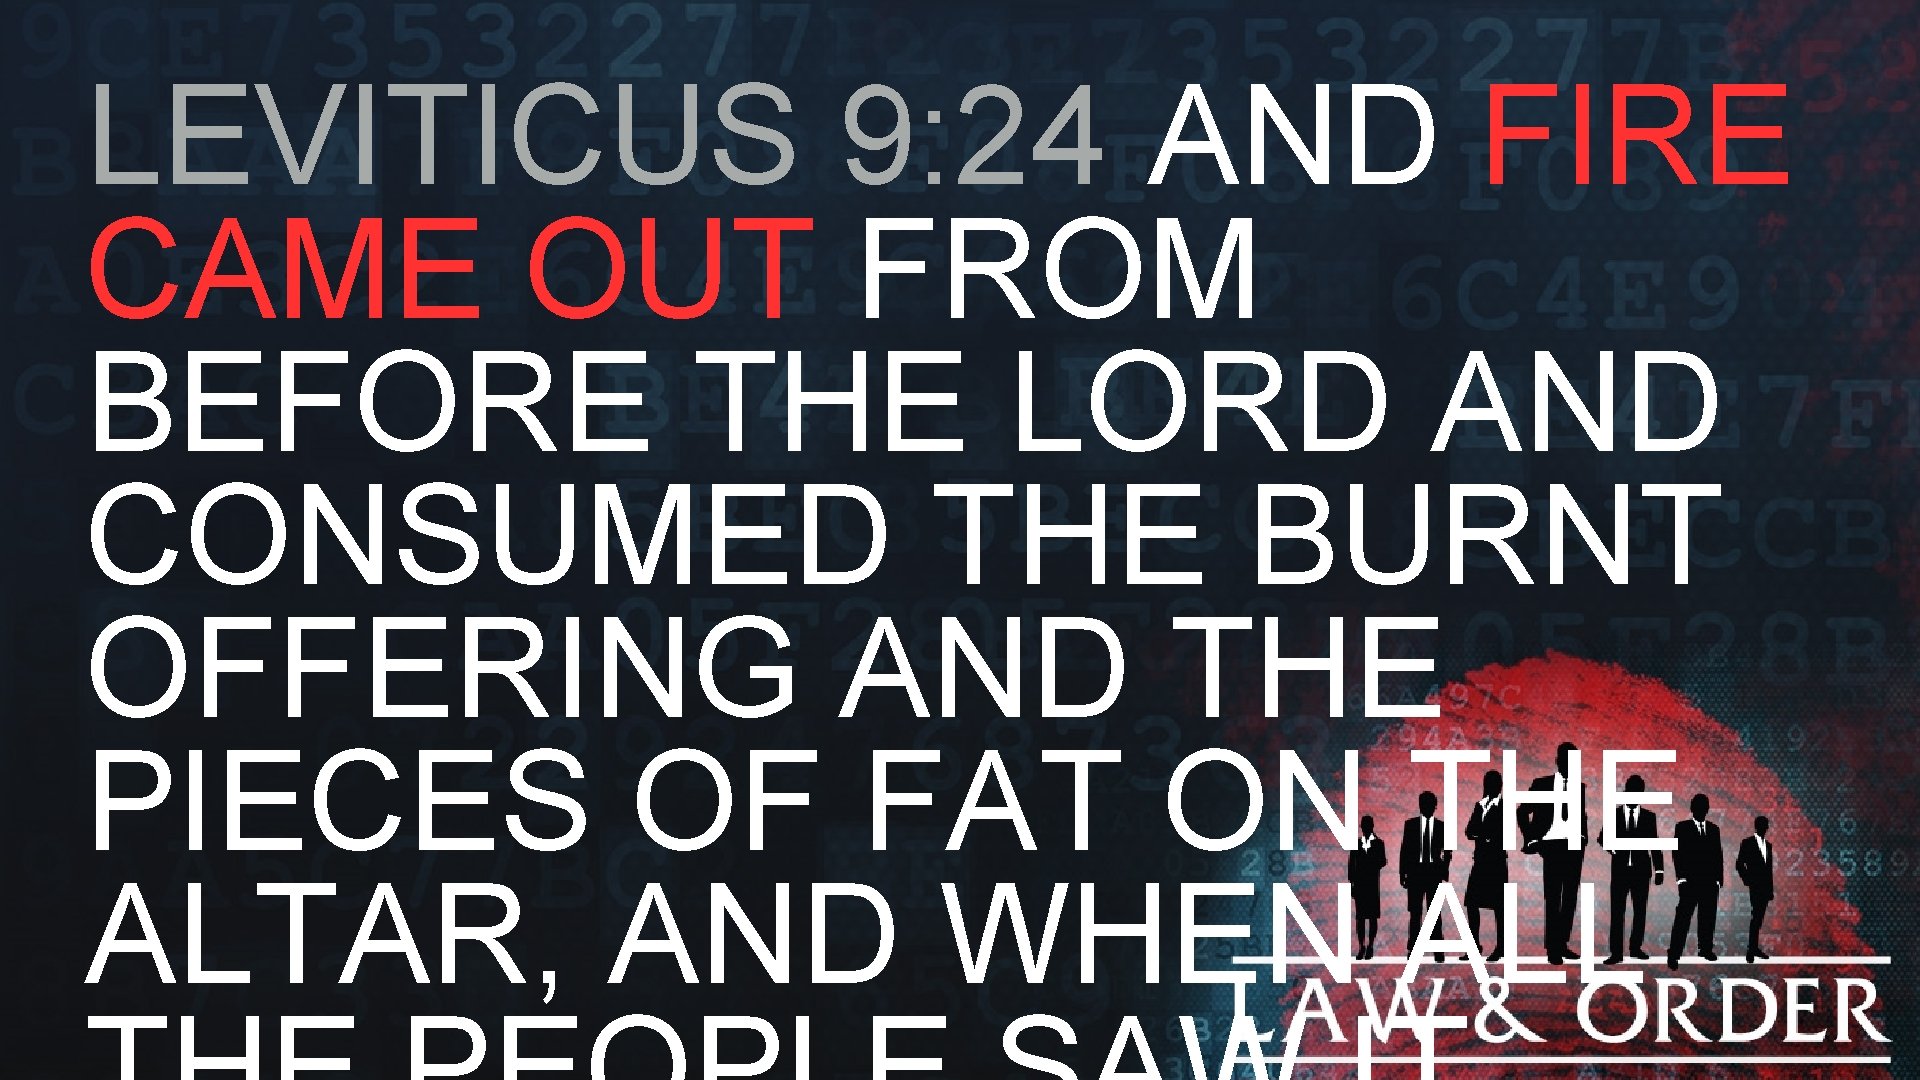 LEVITICUS 9: 24 AND FIRE CAME OUT FROM BEFORE THE LORD AND CONSUMED THE